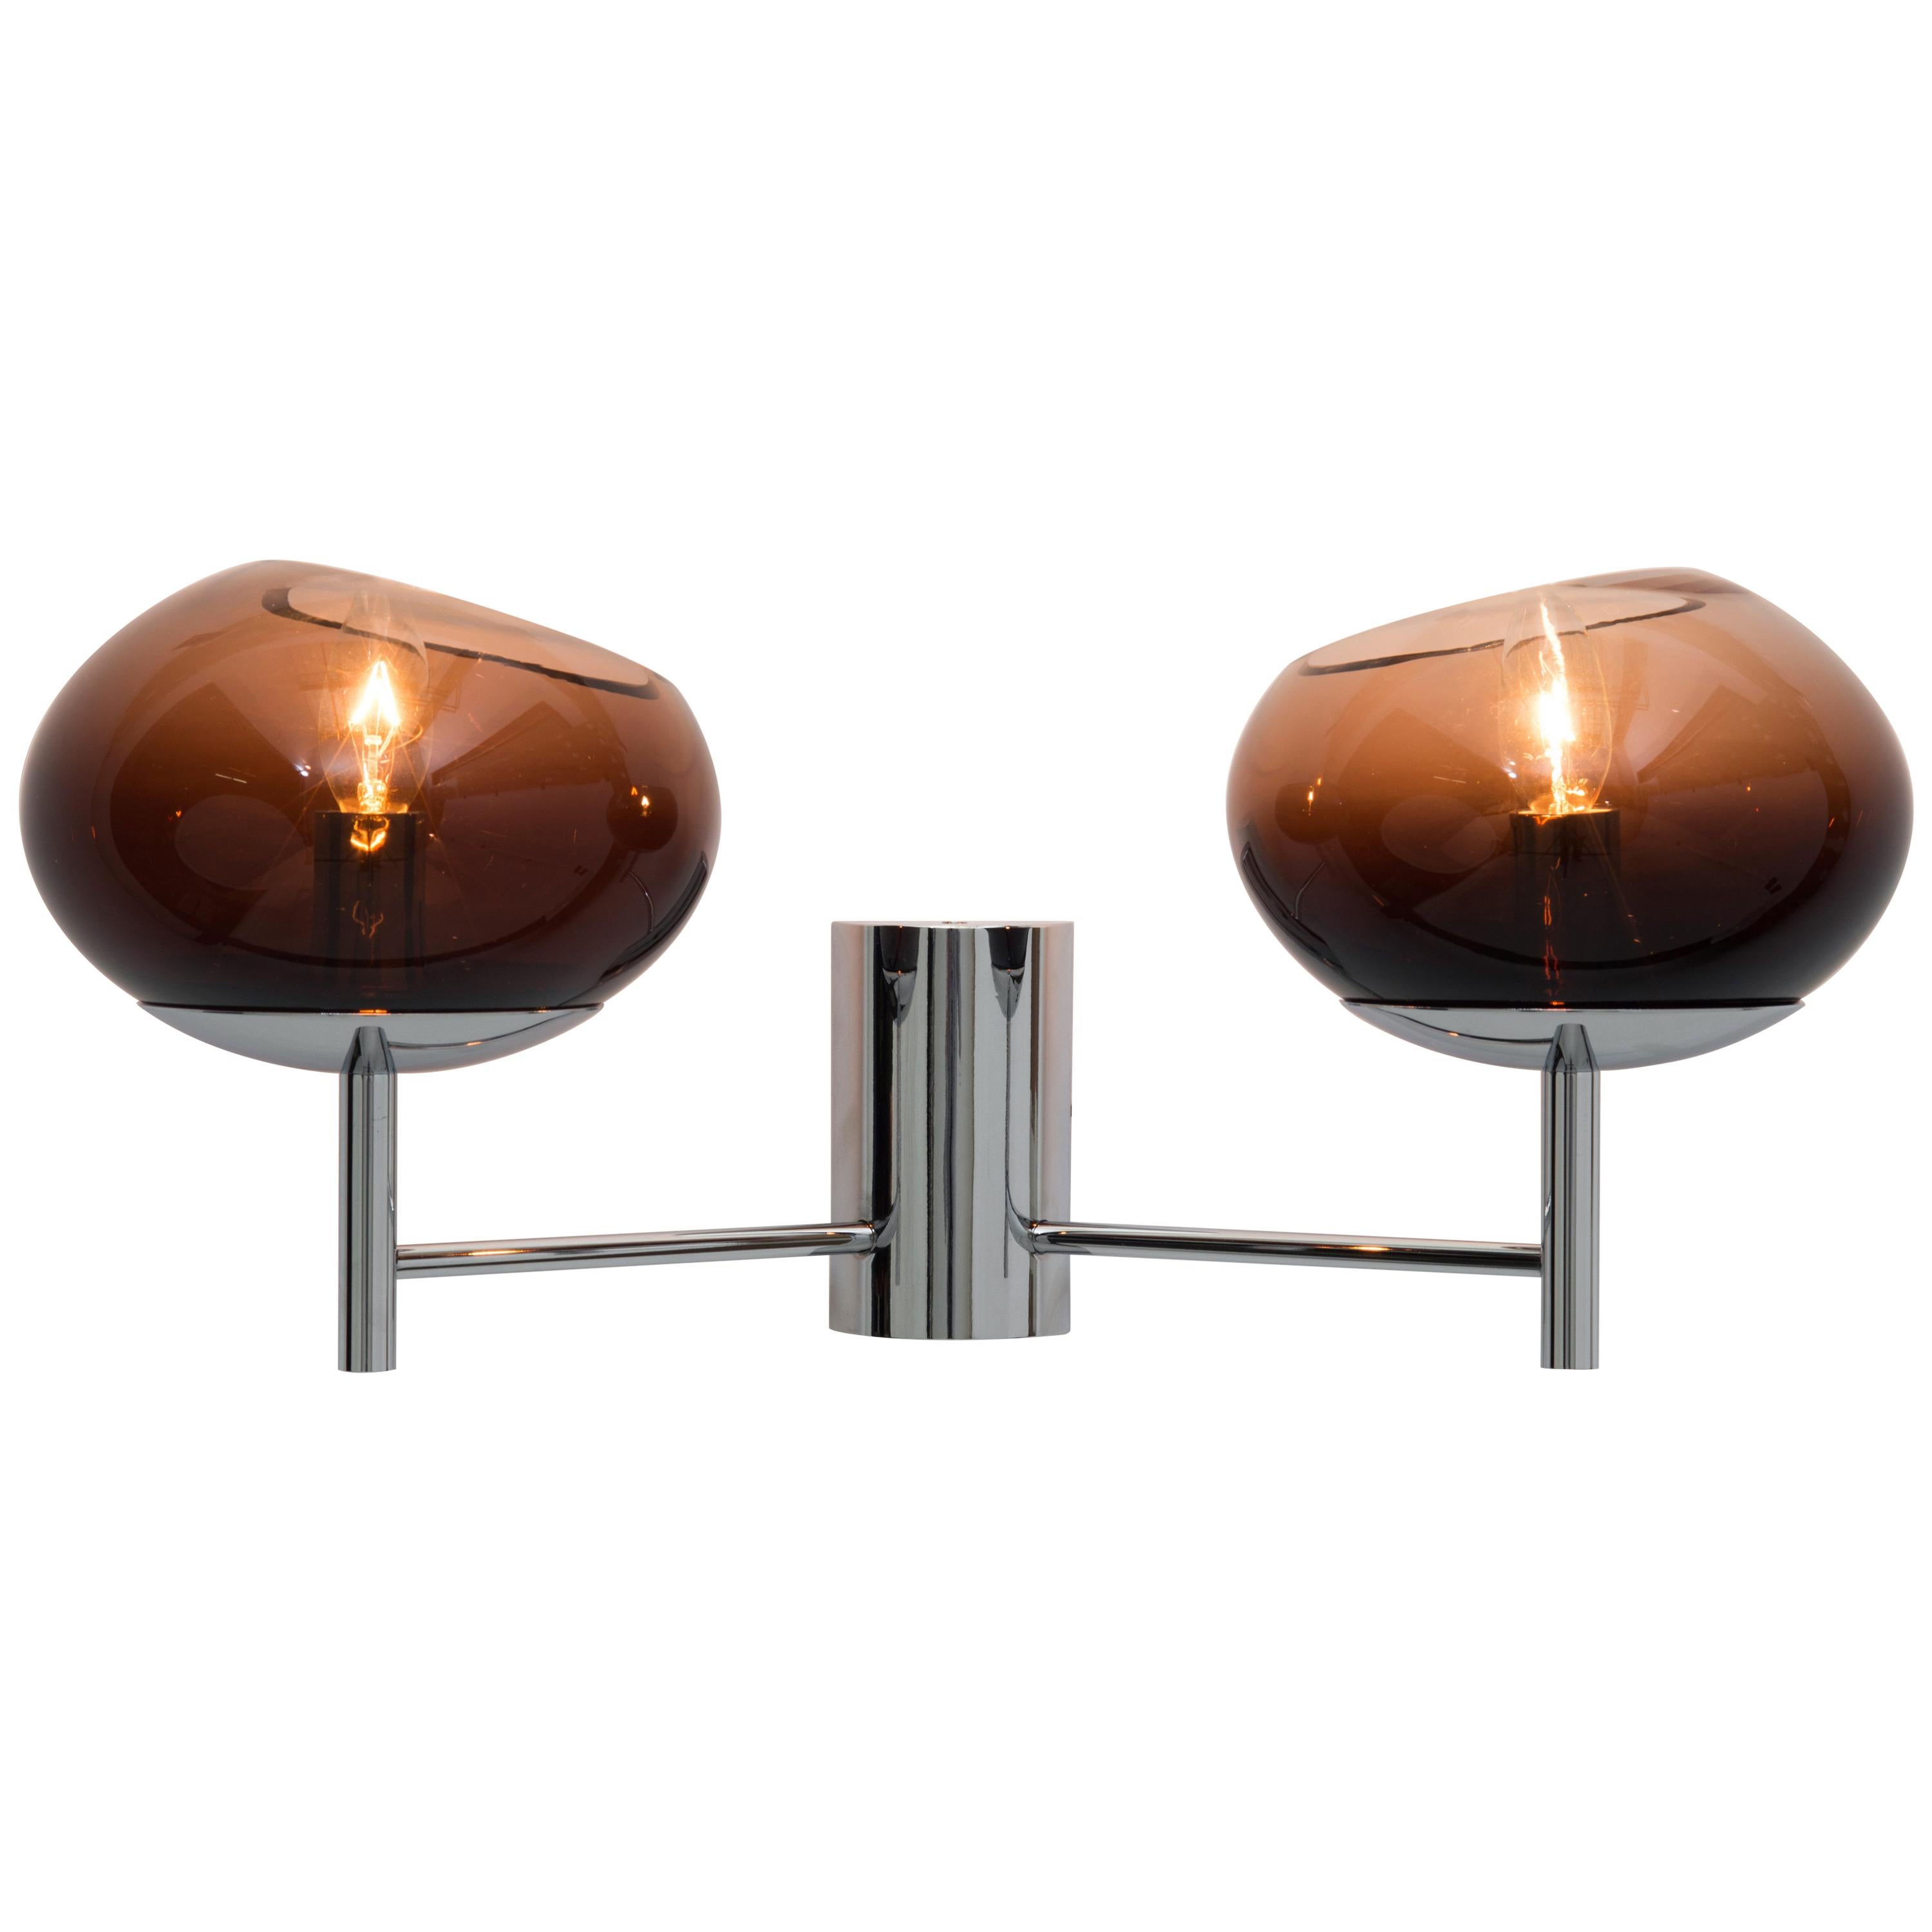 Donghia Renaldo Two-Arm Sconce, Murano Glass in Cognac and Chrome For Sale